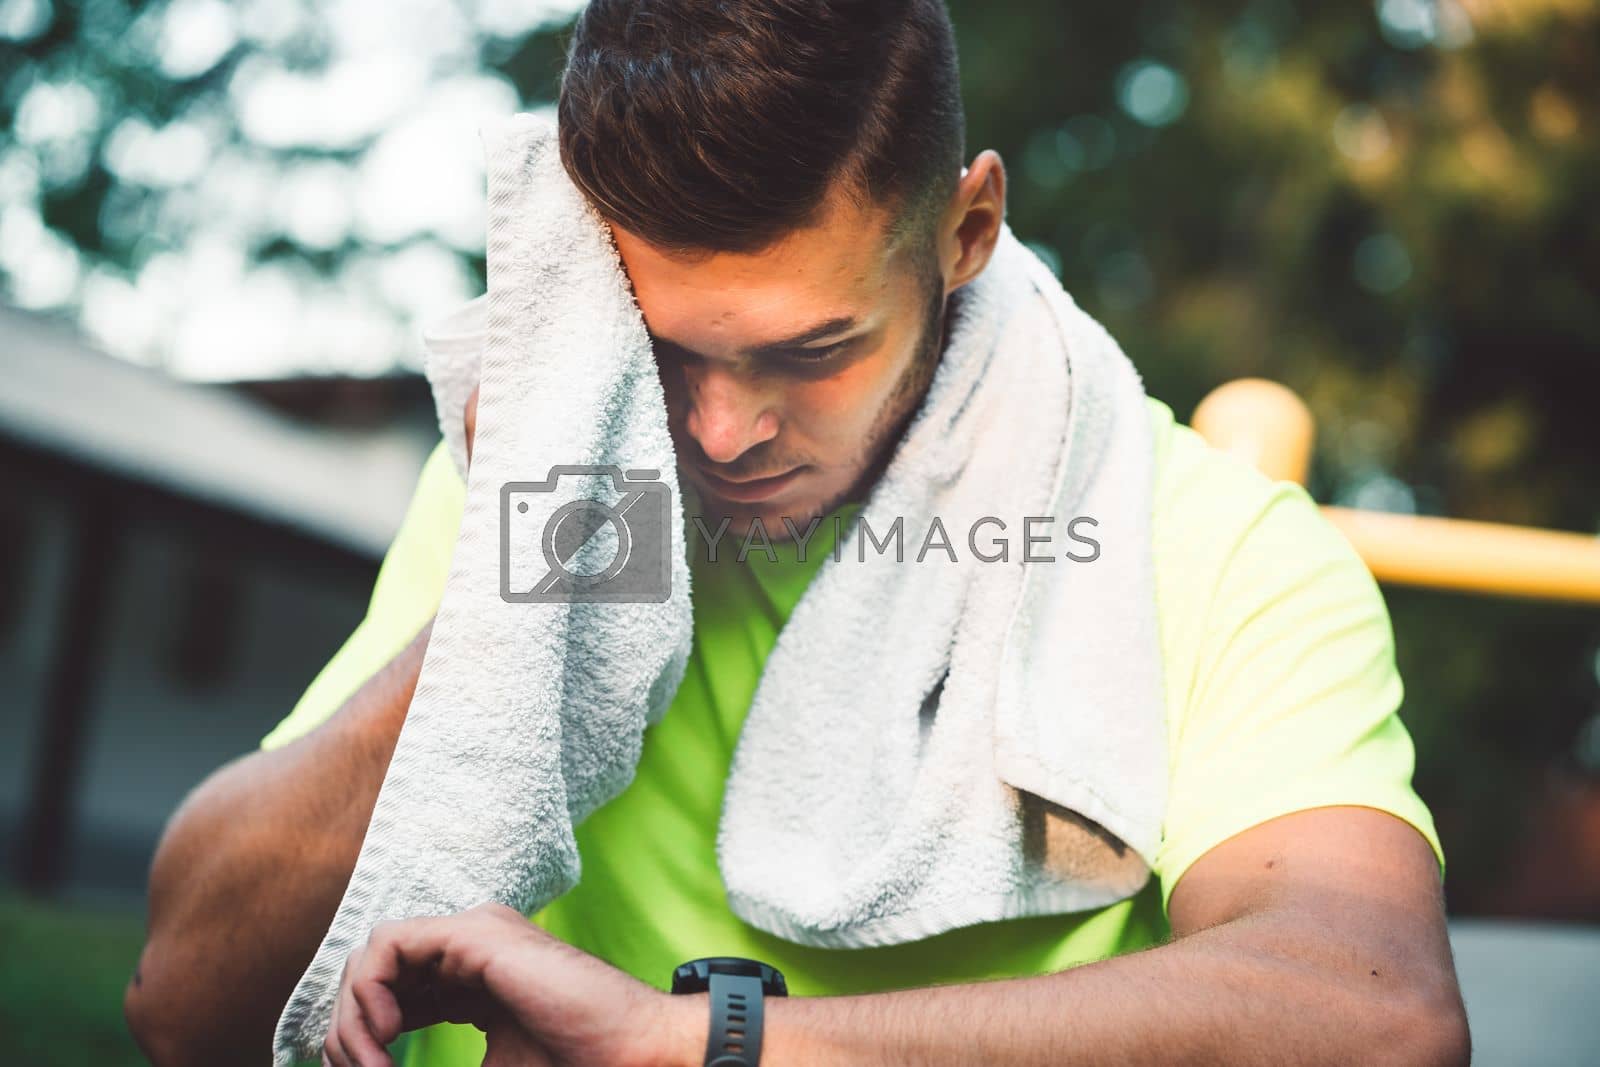 Royalty free image of Sweaty fit man wiping him self with a towel after a workout while looking at his watch by VisualProductions